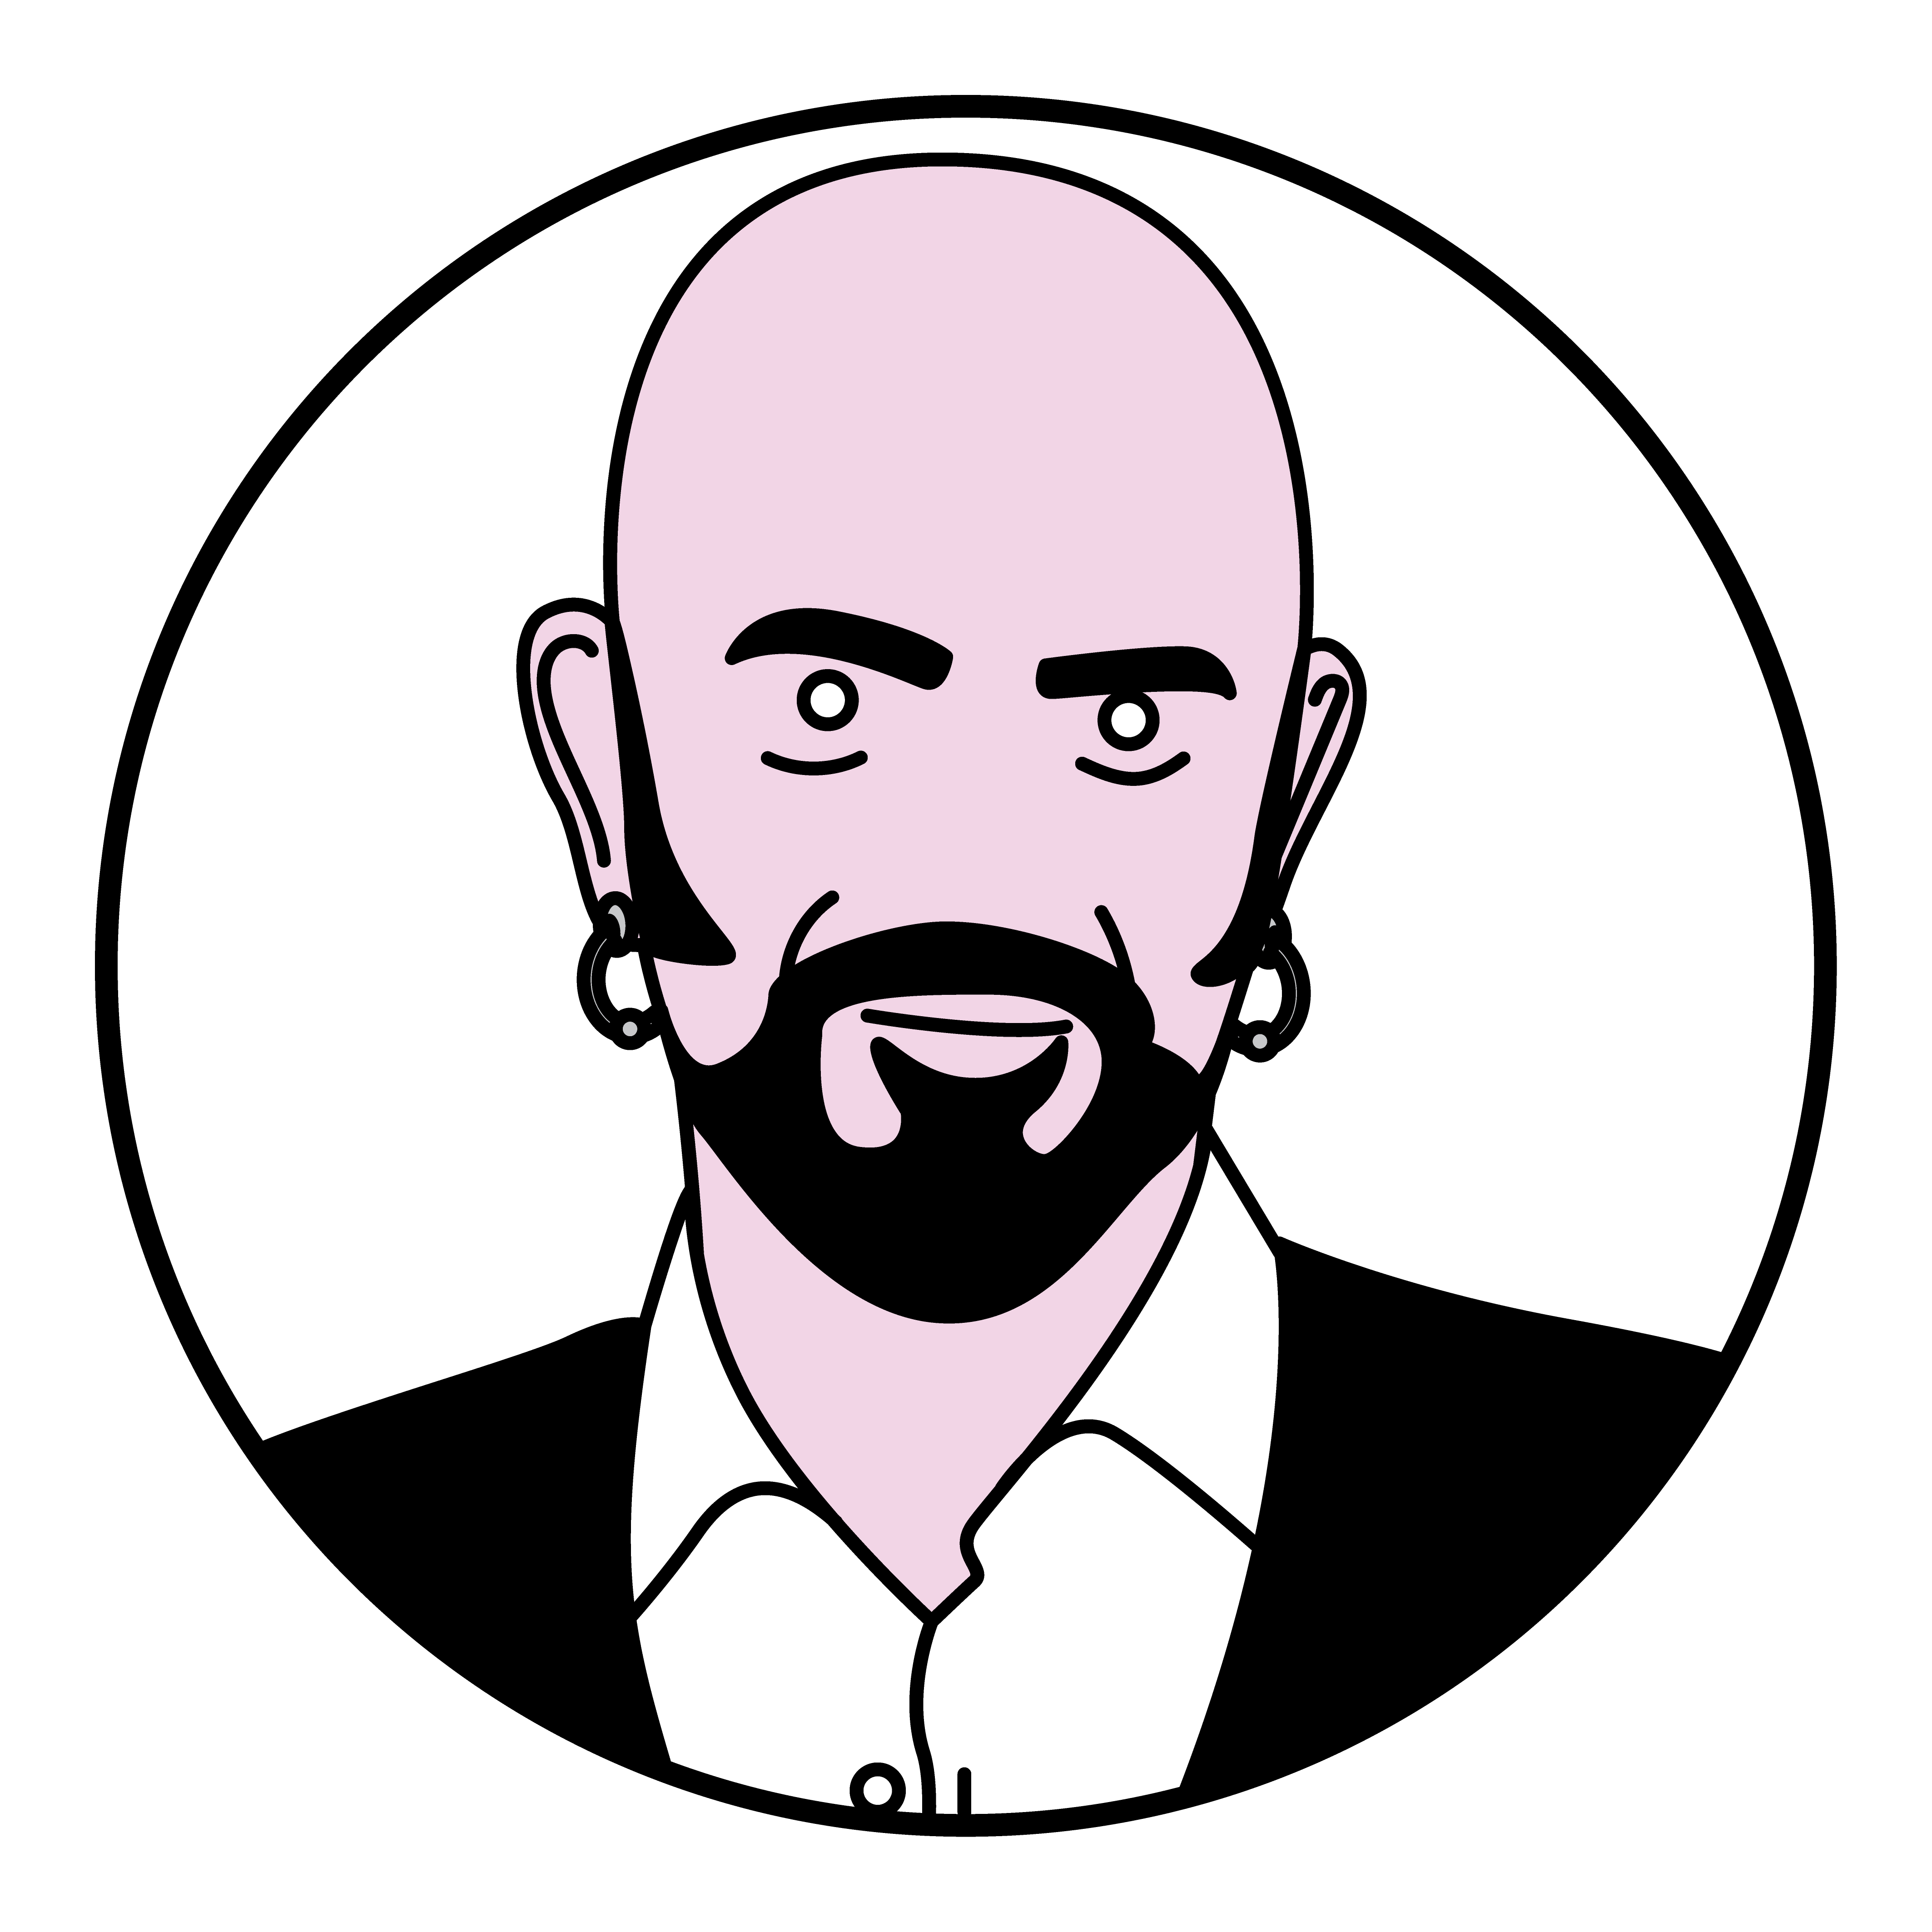 https://www.thebeliever.net/wp-content/uploads/2022/03/Jackson-Galaxy-01.png